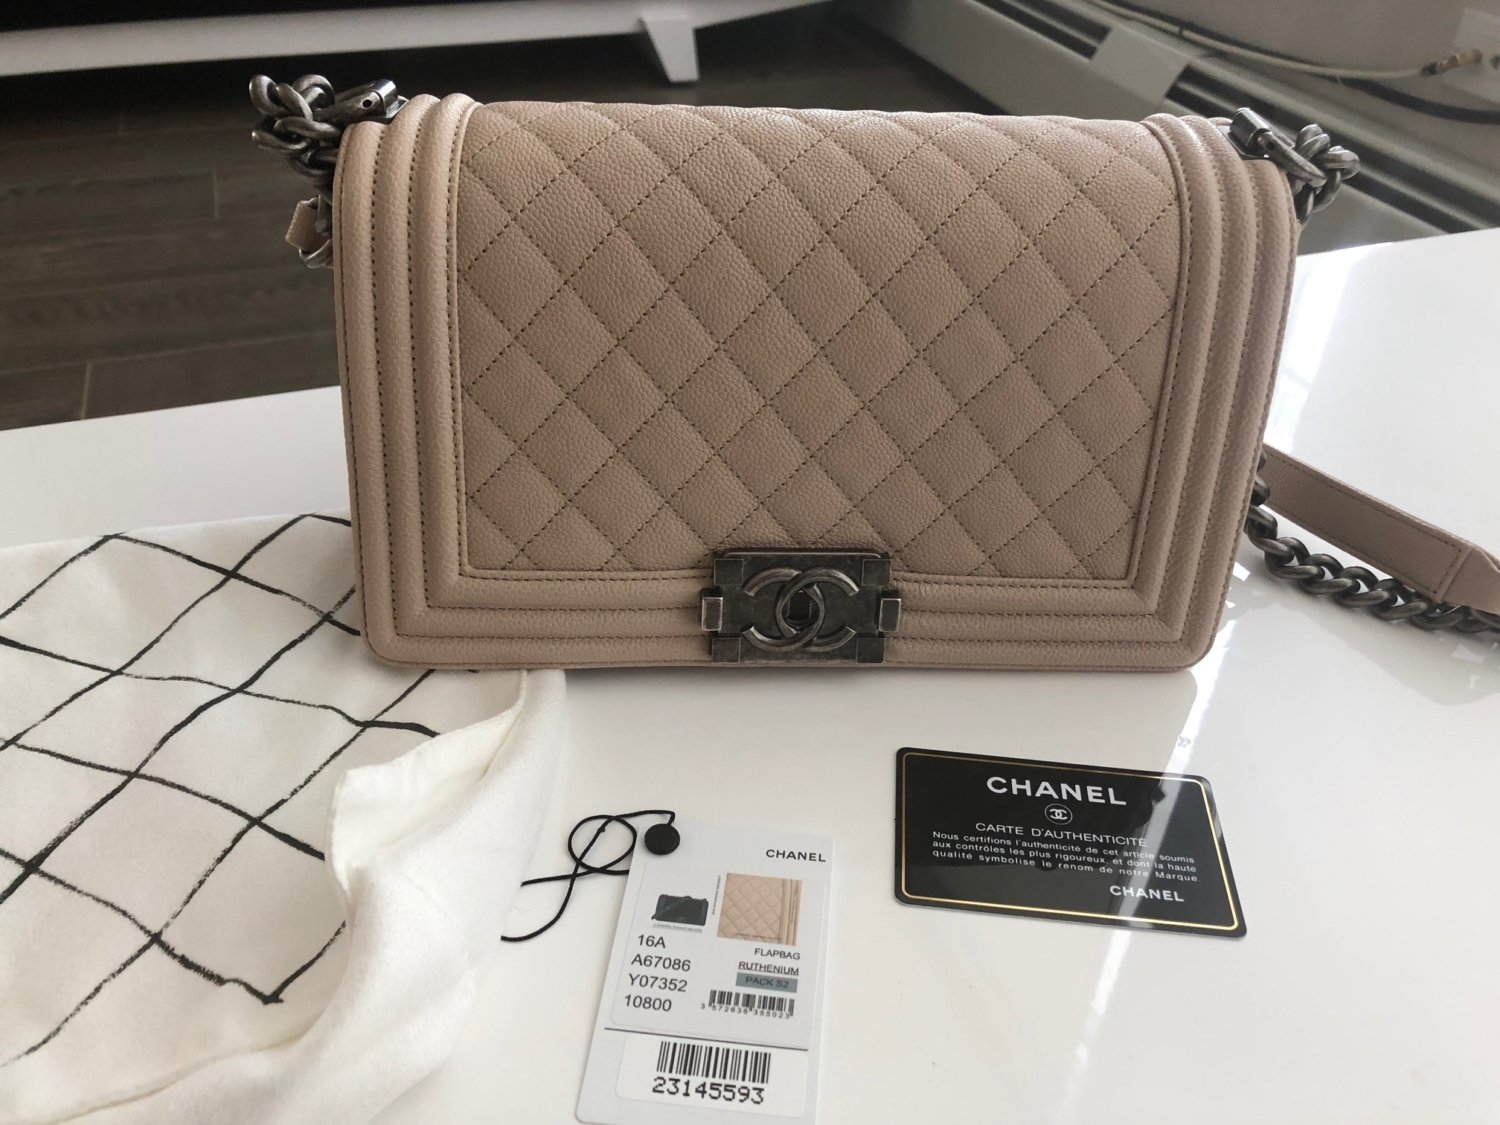 How do I know if my Chanel bag is authentic?